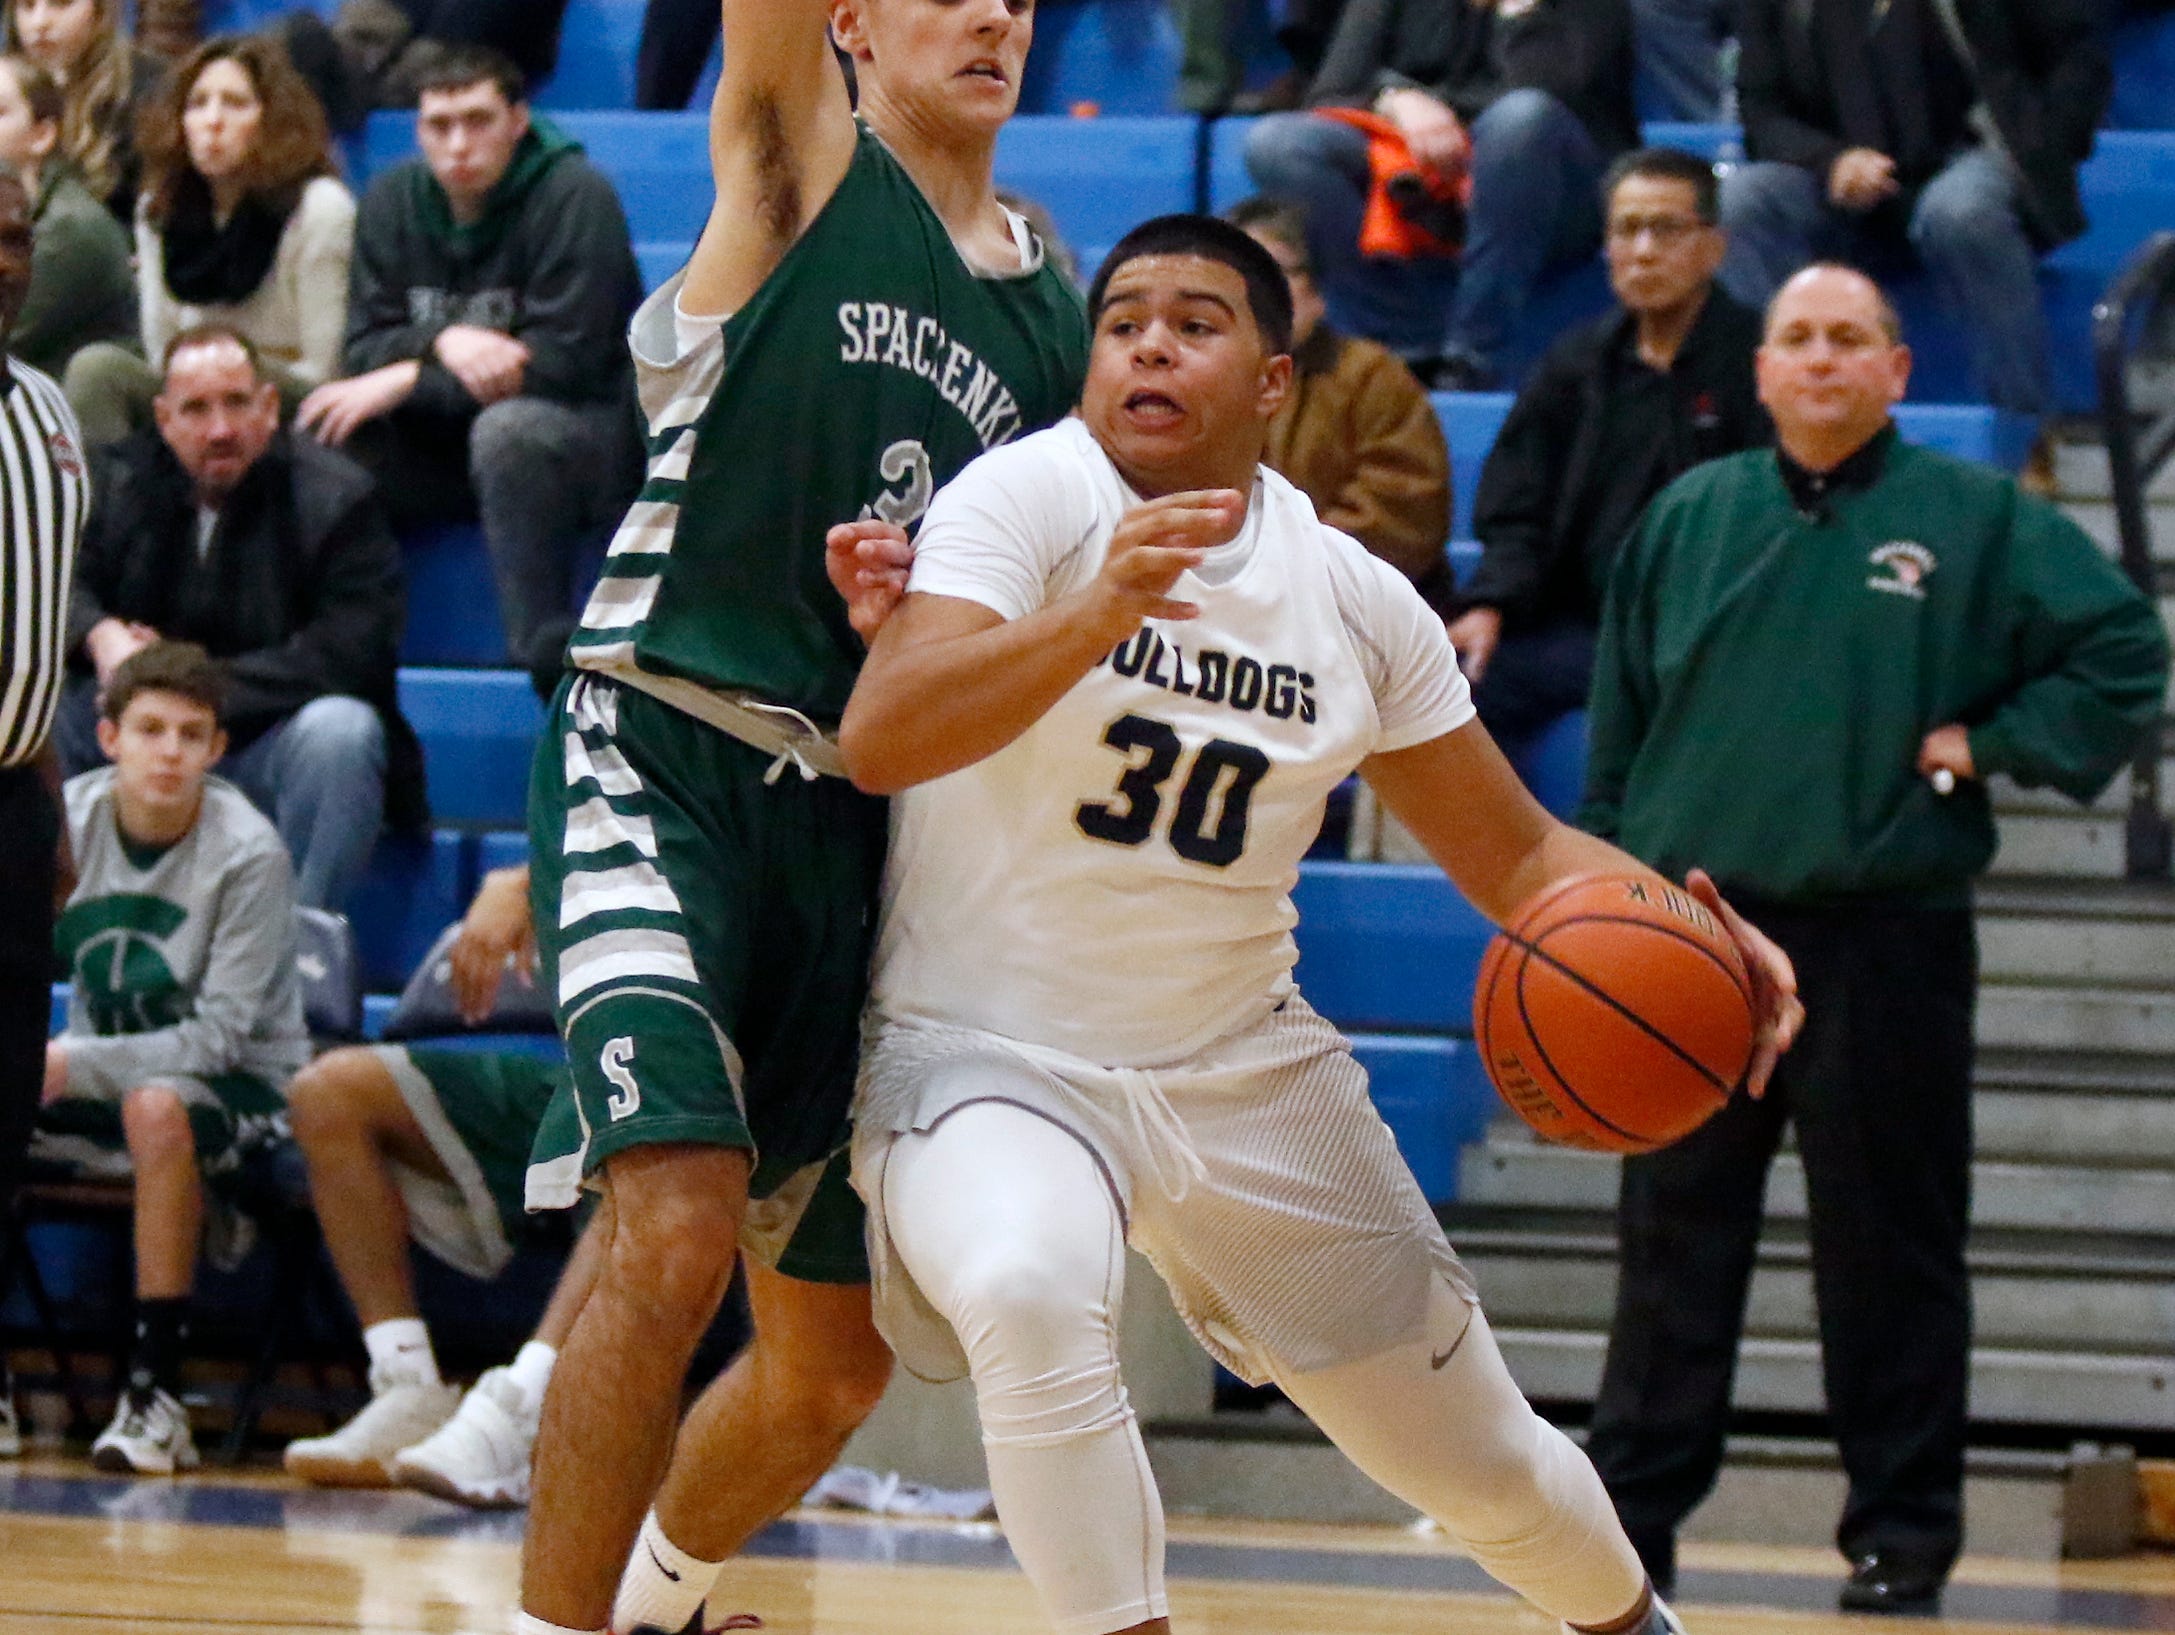 Beacon's Andre Davis (30) drives the baseline against Spackenkill's Haden Peek (3) in the championship game of the Duane Davis memorial basketball tournament at Our Lady of Lourdes High School in Poughkeepsie on Saturday, December 31, 2016.